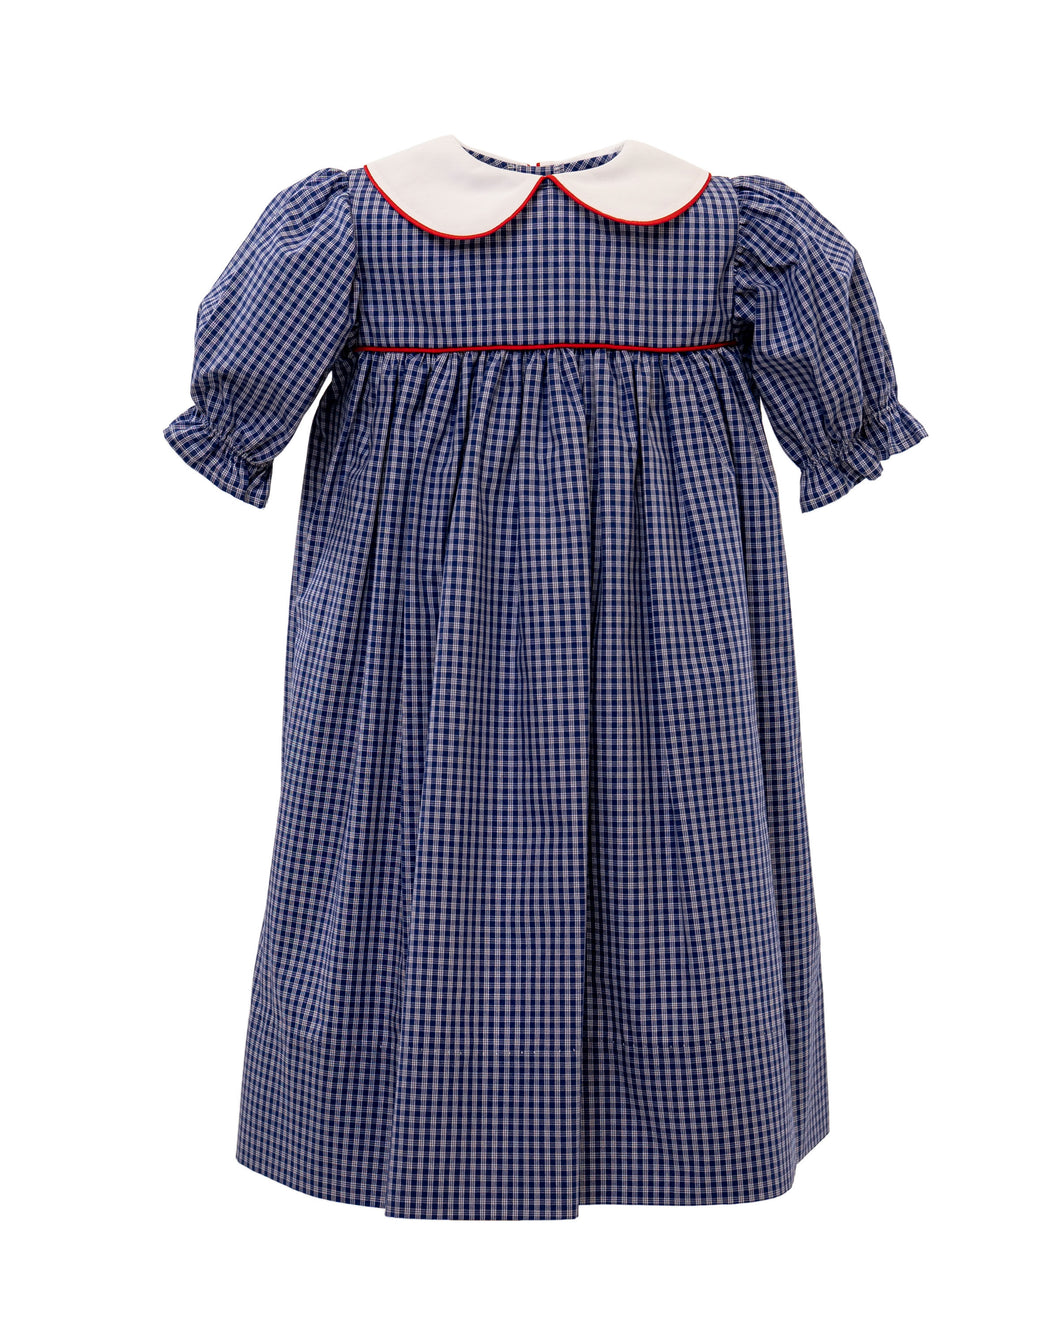 Little Girls Royal Blue Dress with Red Piping - Rebecca Dress in Royal Blue Plaid Pastel with Red Piping